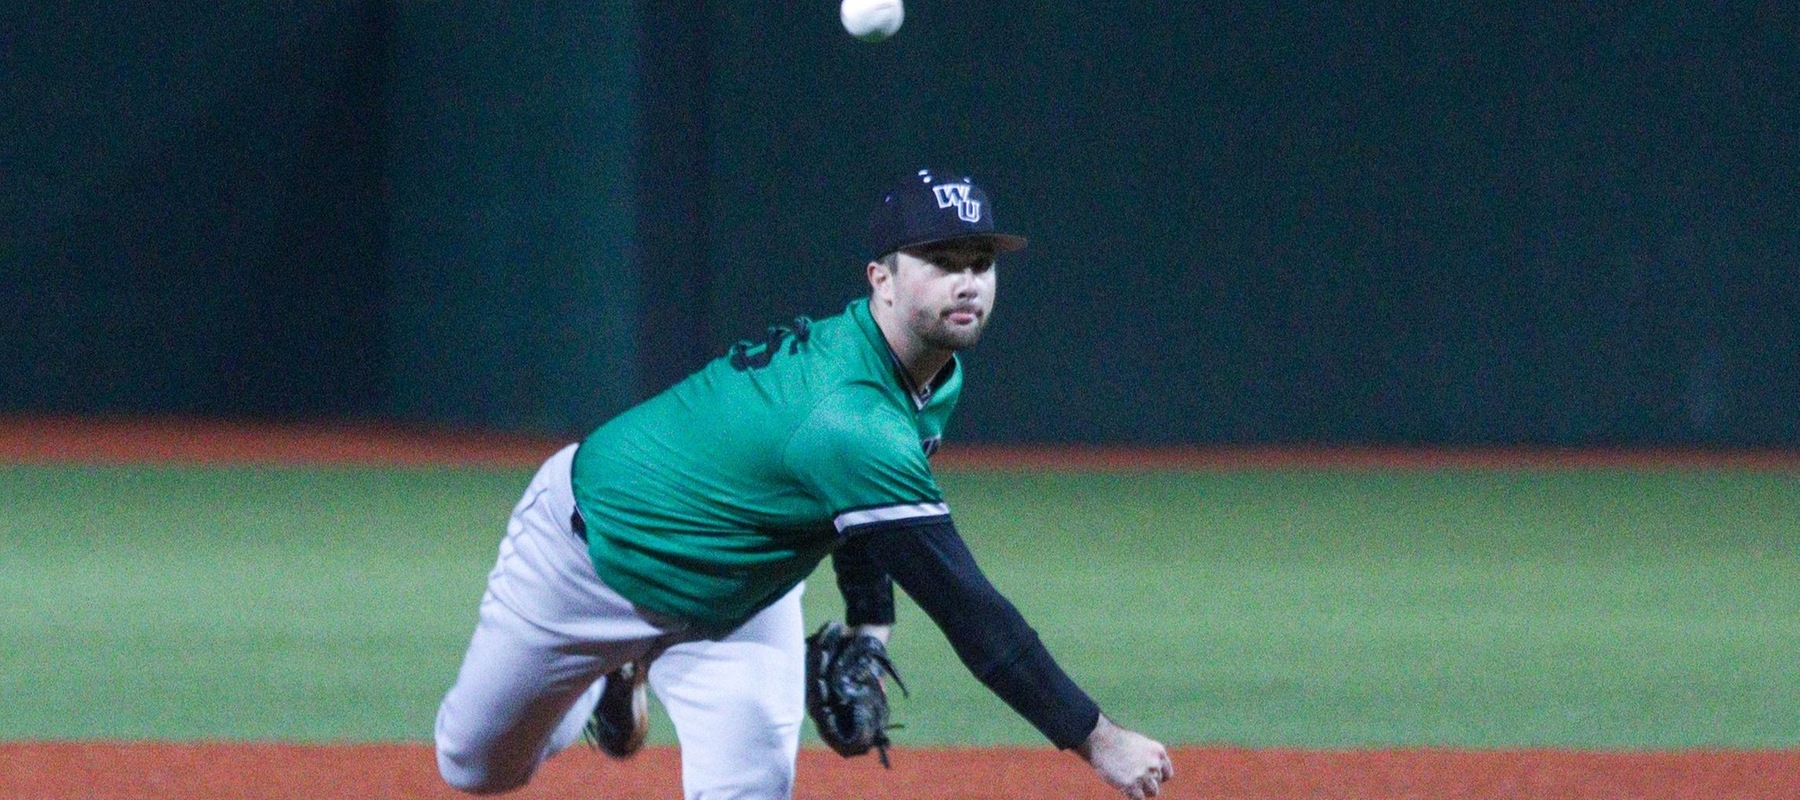 File photo of Steve Schenning who pitched three scoreless innings in relief to earn the win against Mansfield. Copyright 2024; Wilmington University. All rights reserved. Photo by Trudy Spence. February 23, 2024 vs. Franklin Pierce in Myrtle Beach, S.C.